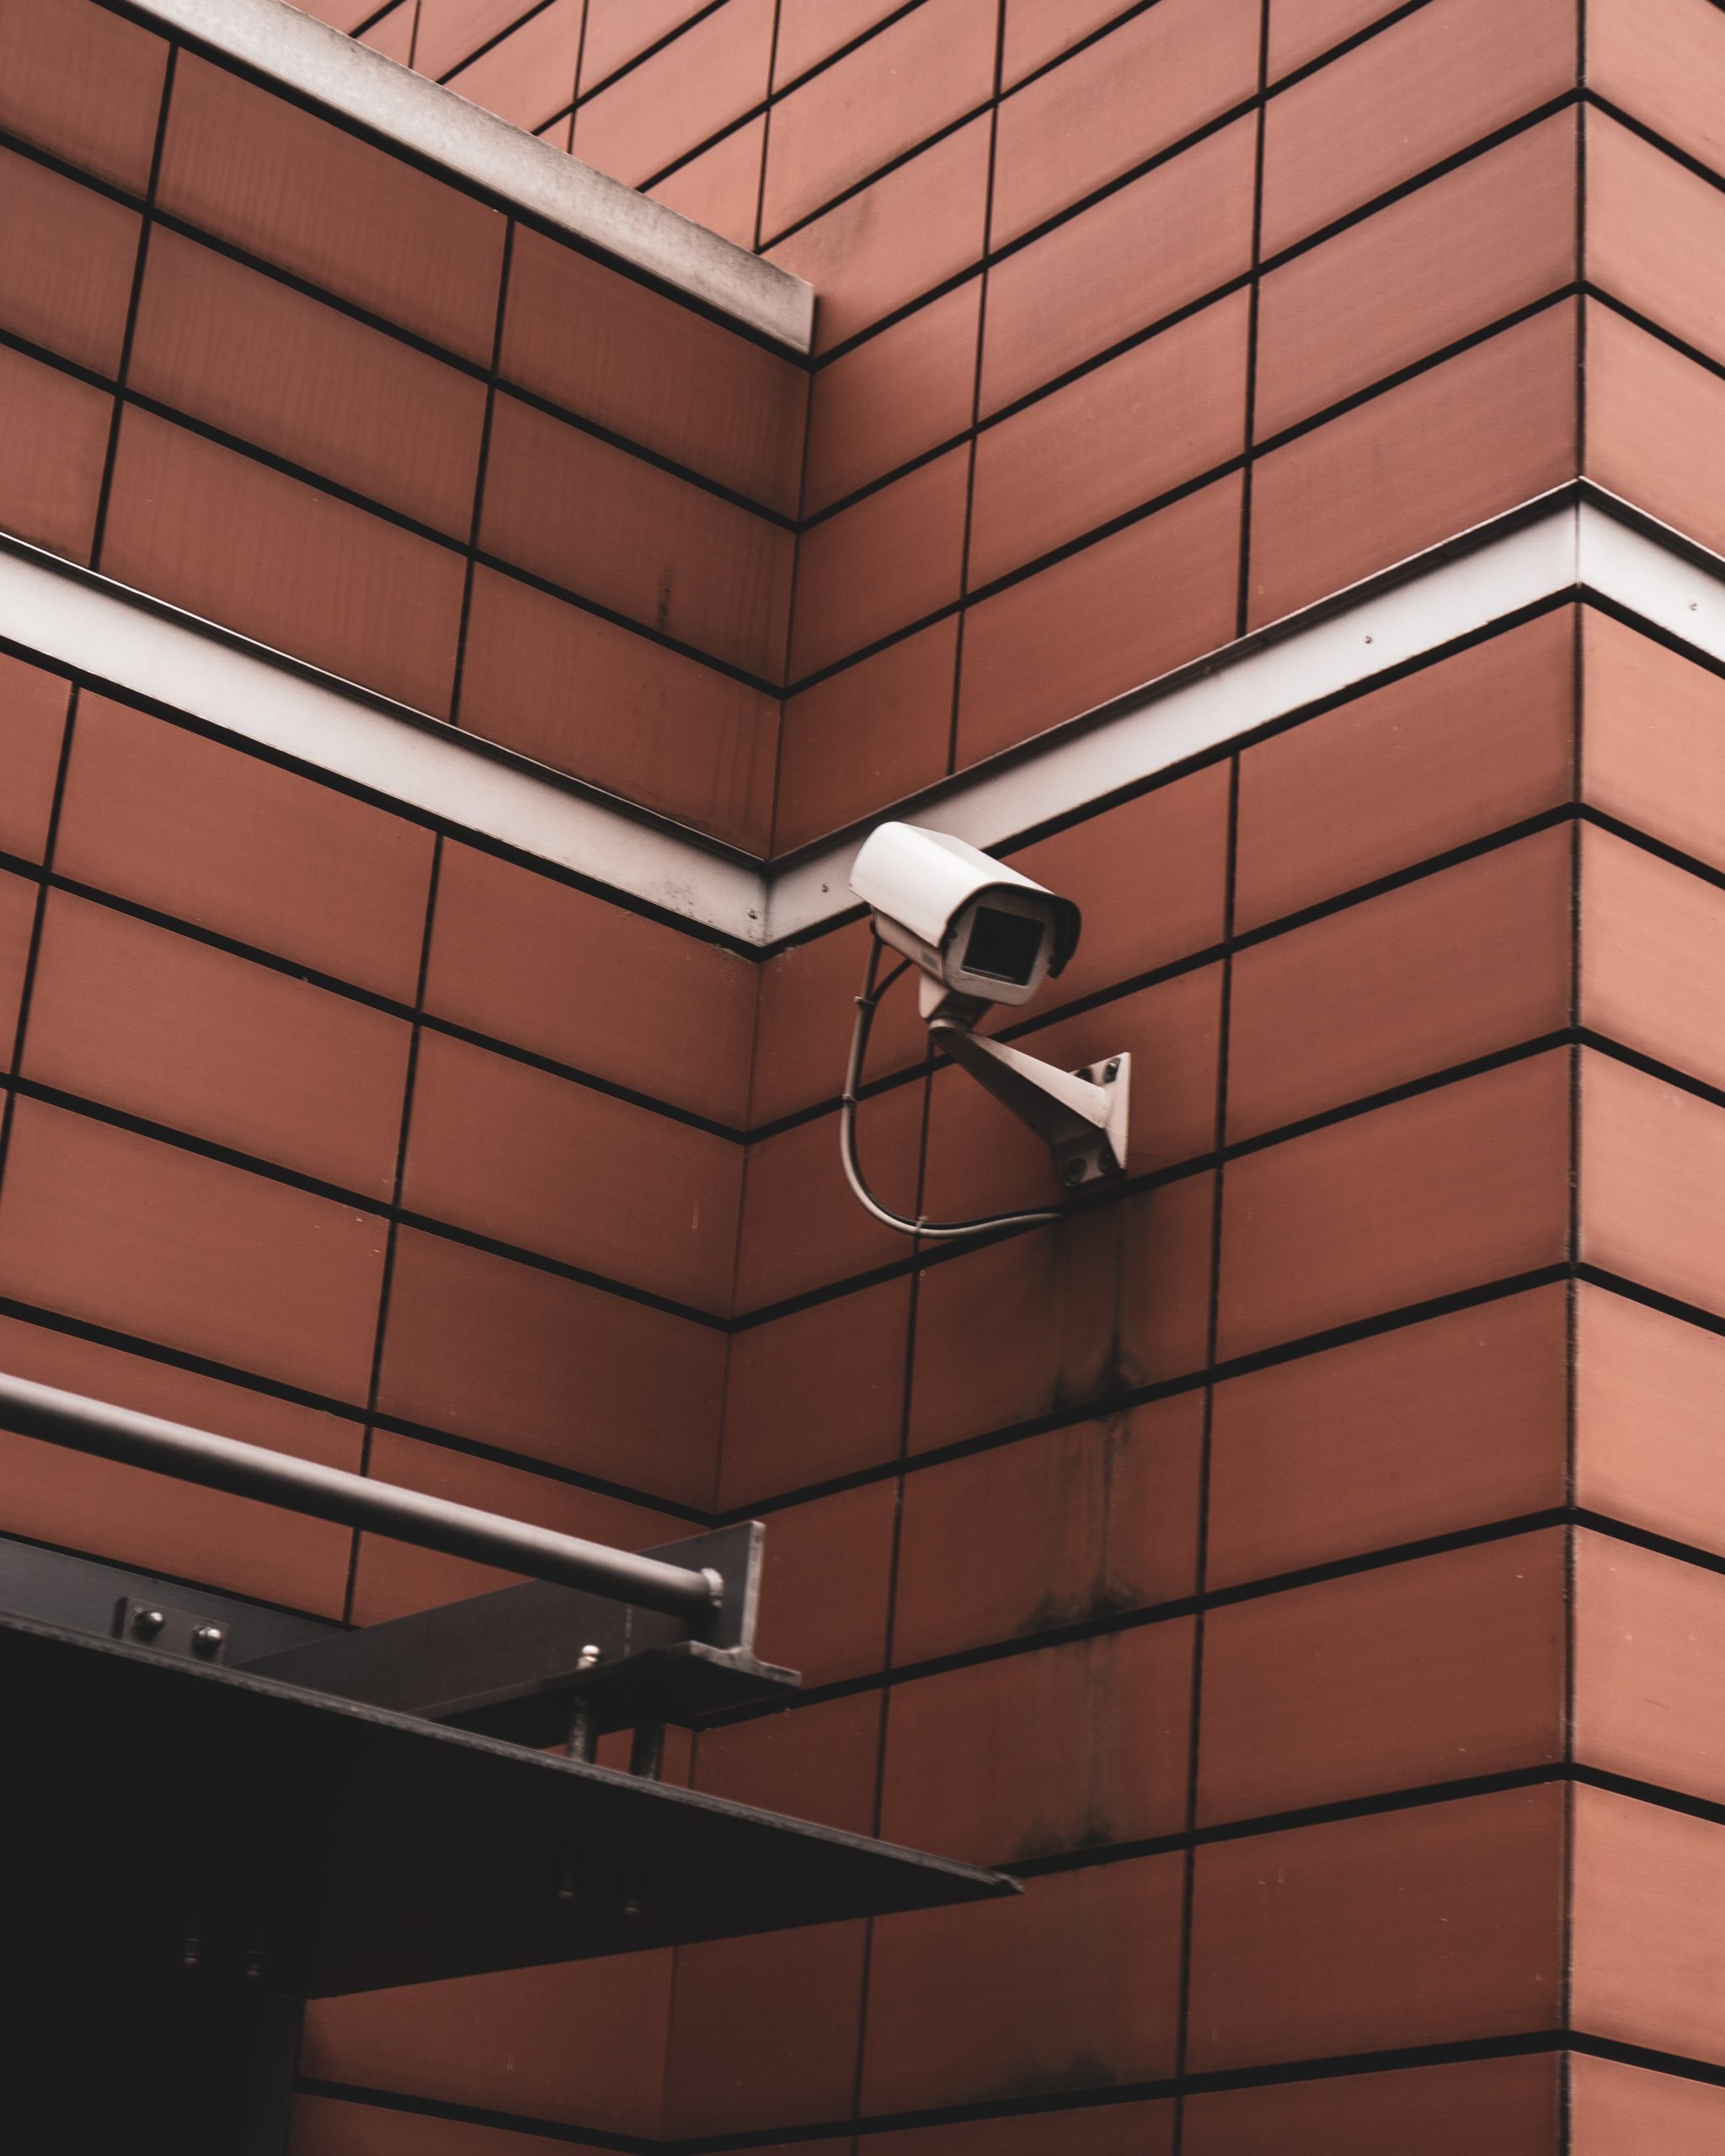 Things You Should Consider Before Buying A Surveillance Camera